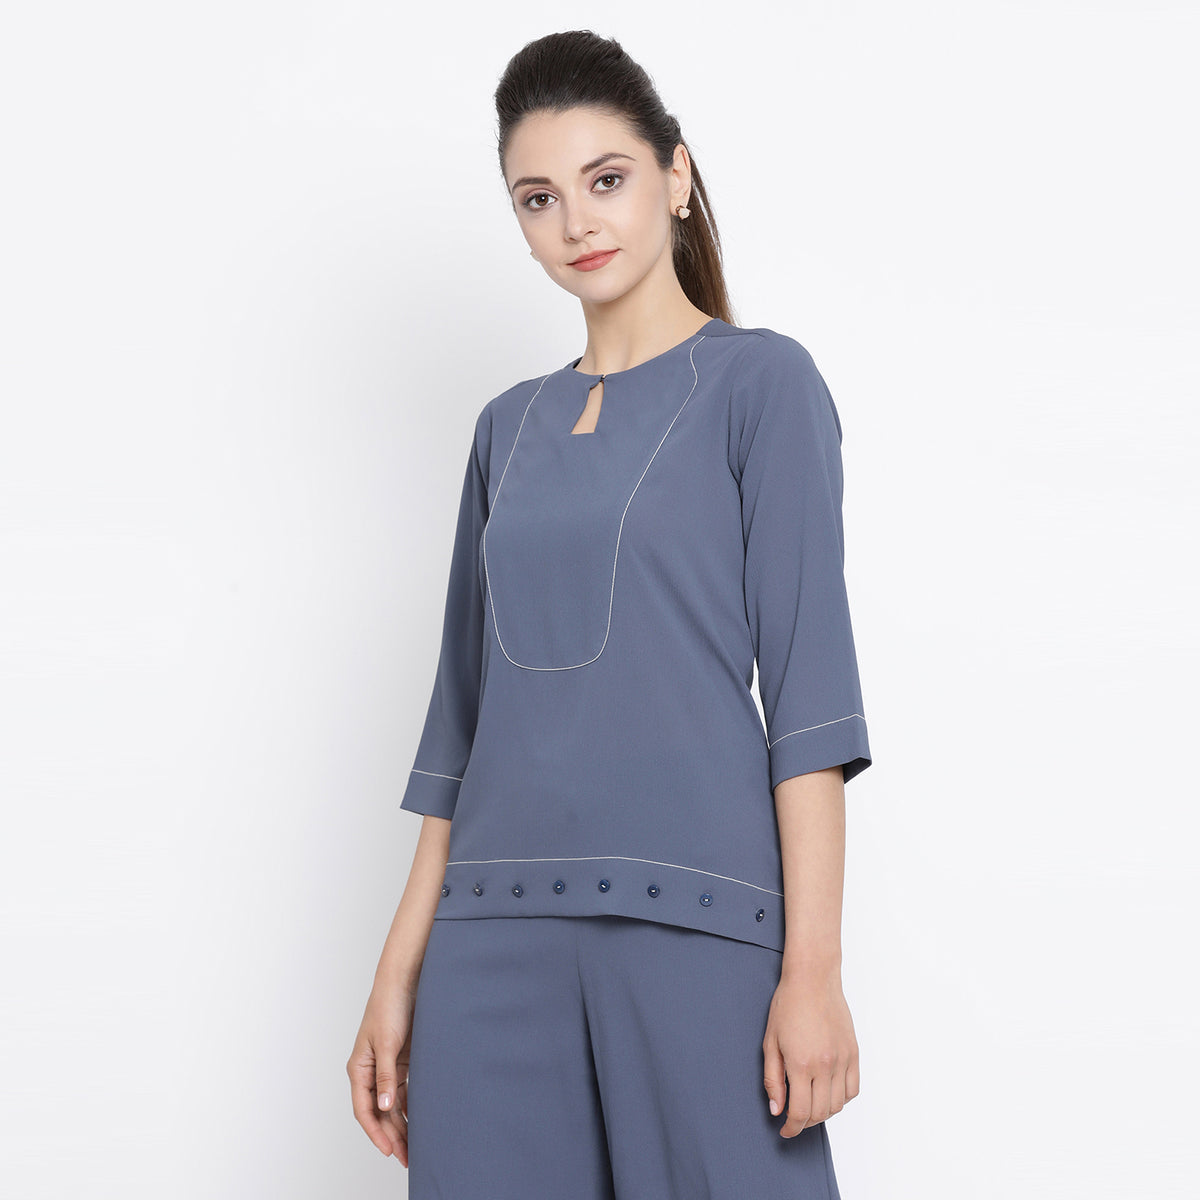 Stone Blue Crepe Top With White Top Stitching At Yoke